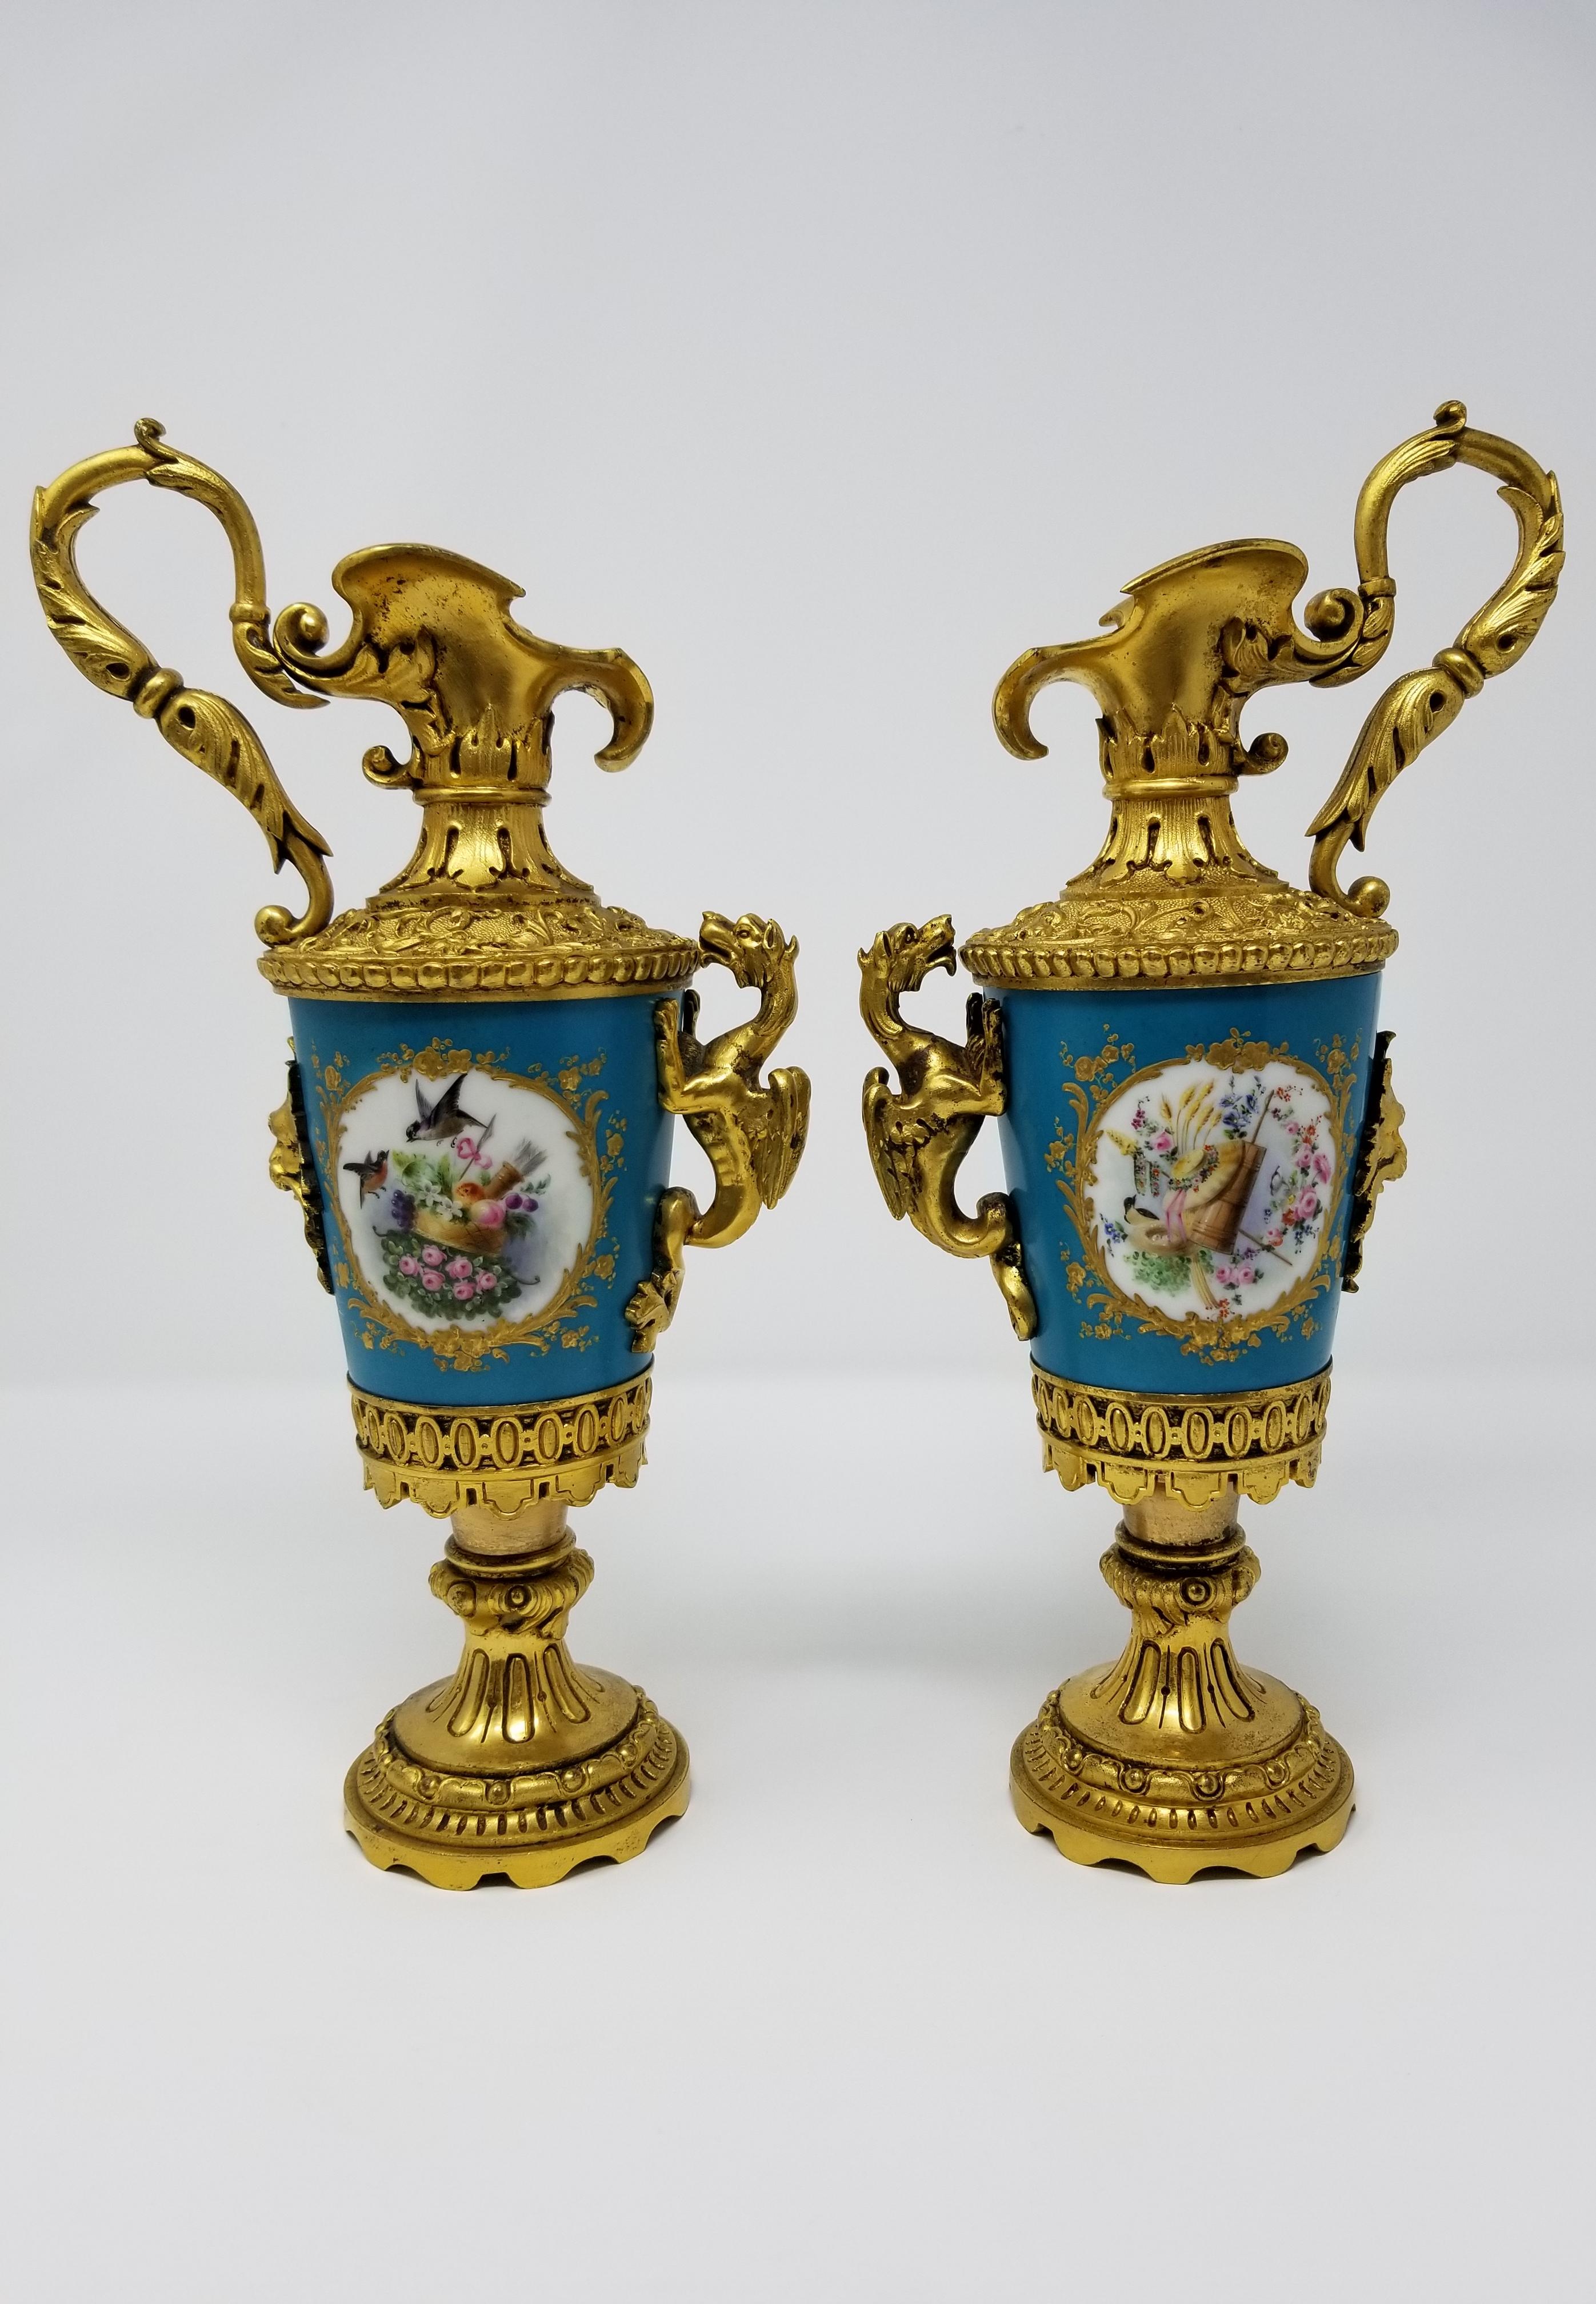 A beautiful pair of 19th century Louis XVI style French Sèvres style Porcelain and ormolu-mounted Ewers with dragon handles, birds and flowers. The porcelain is mounted on the finest quality of hand-chiseled and chased Doré bronze mounts. The top of